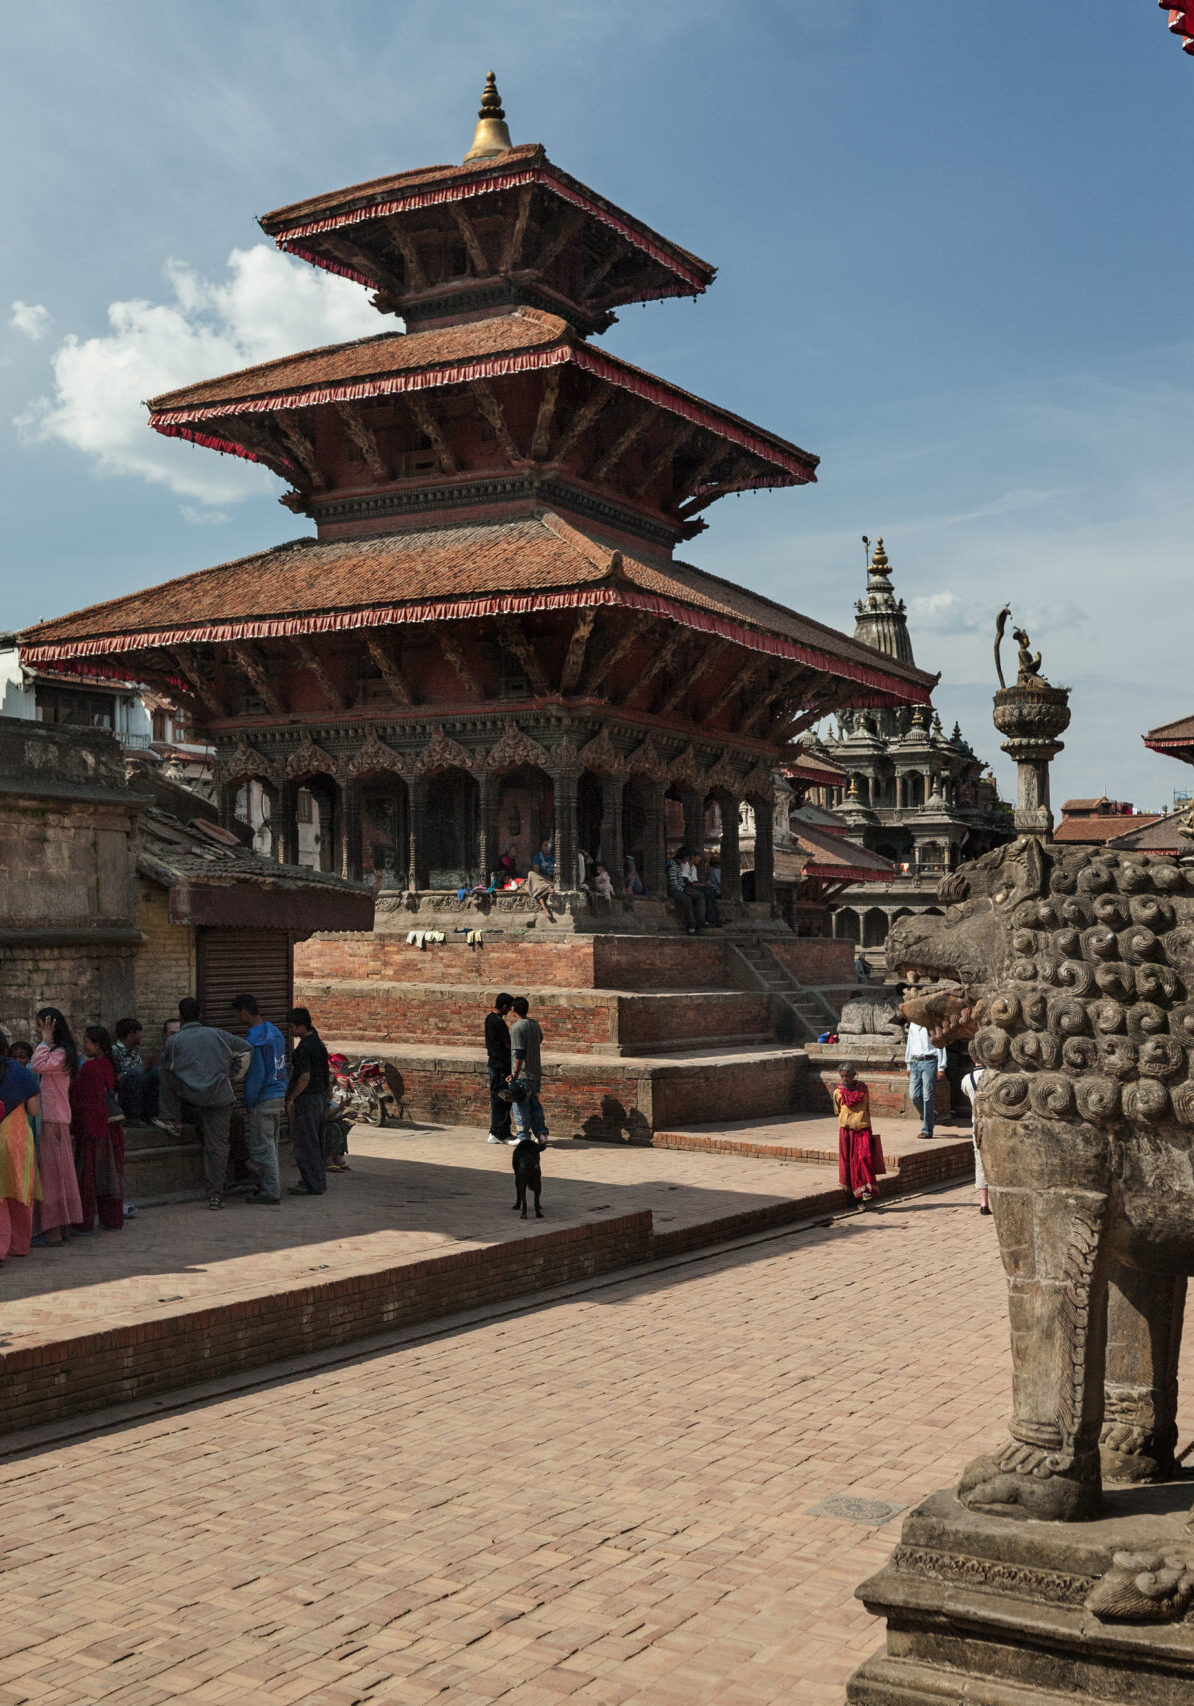 Historic buildings of Durbar Square in the city of Kathmandu in Nepal. (Before the 2015 earthquake)